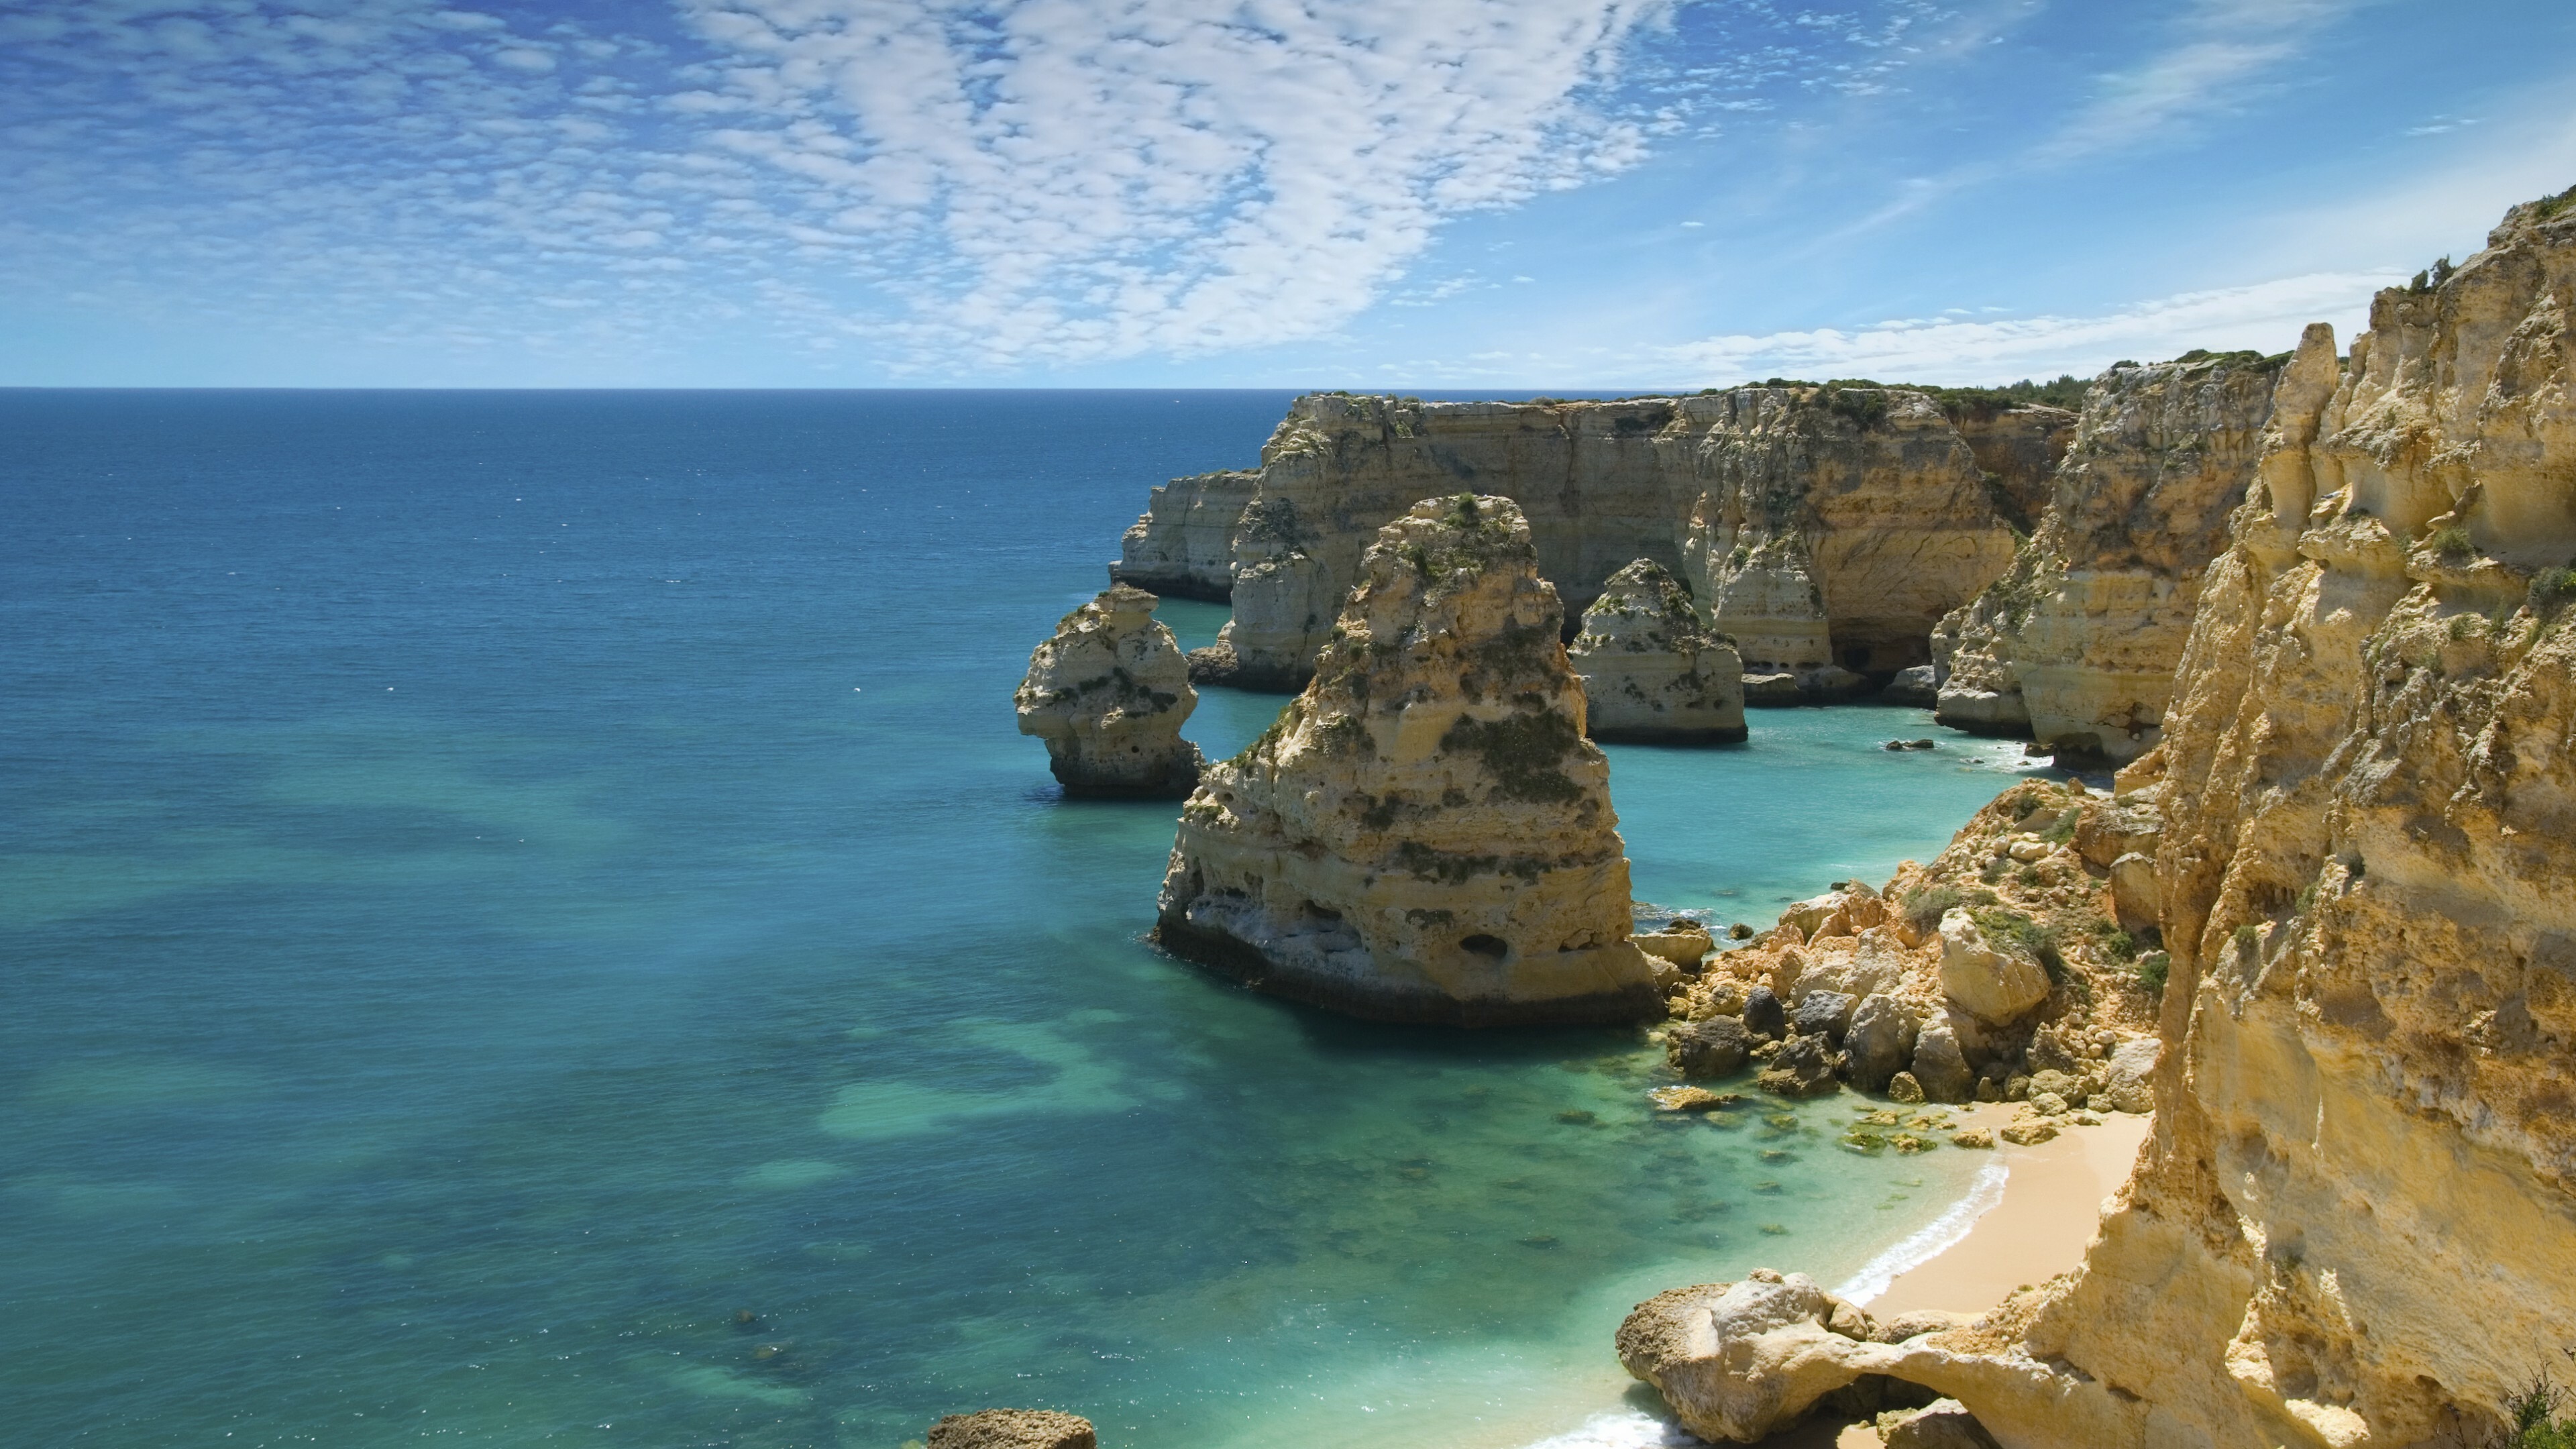 Portugal: Founded first as a county of the Kingdom of Leon in 868. 3840x2160 4K Wallpaper.